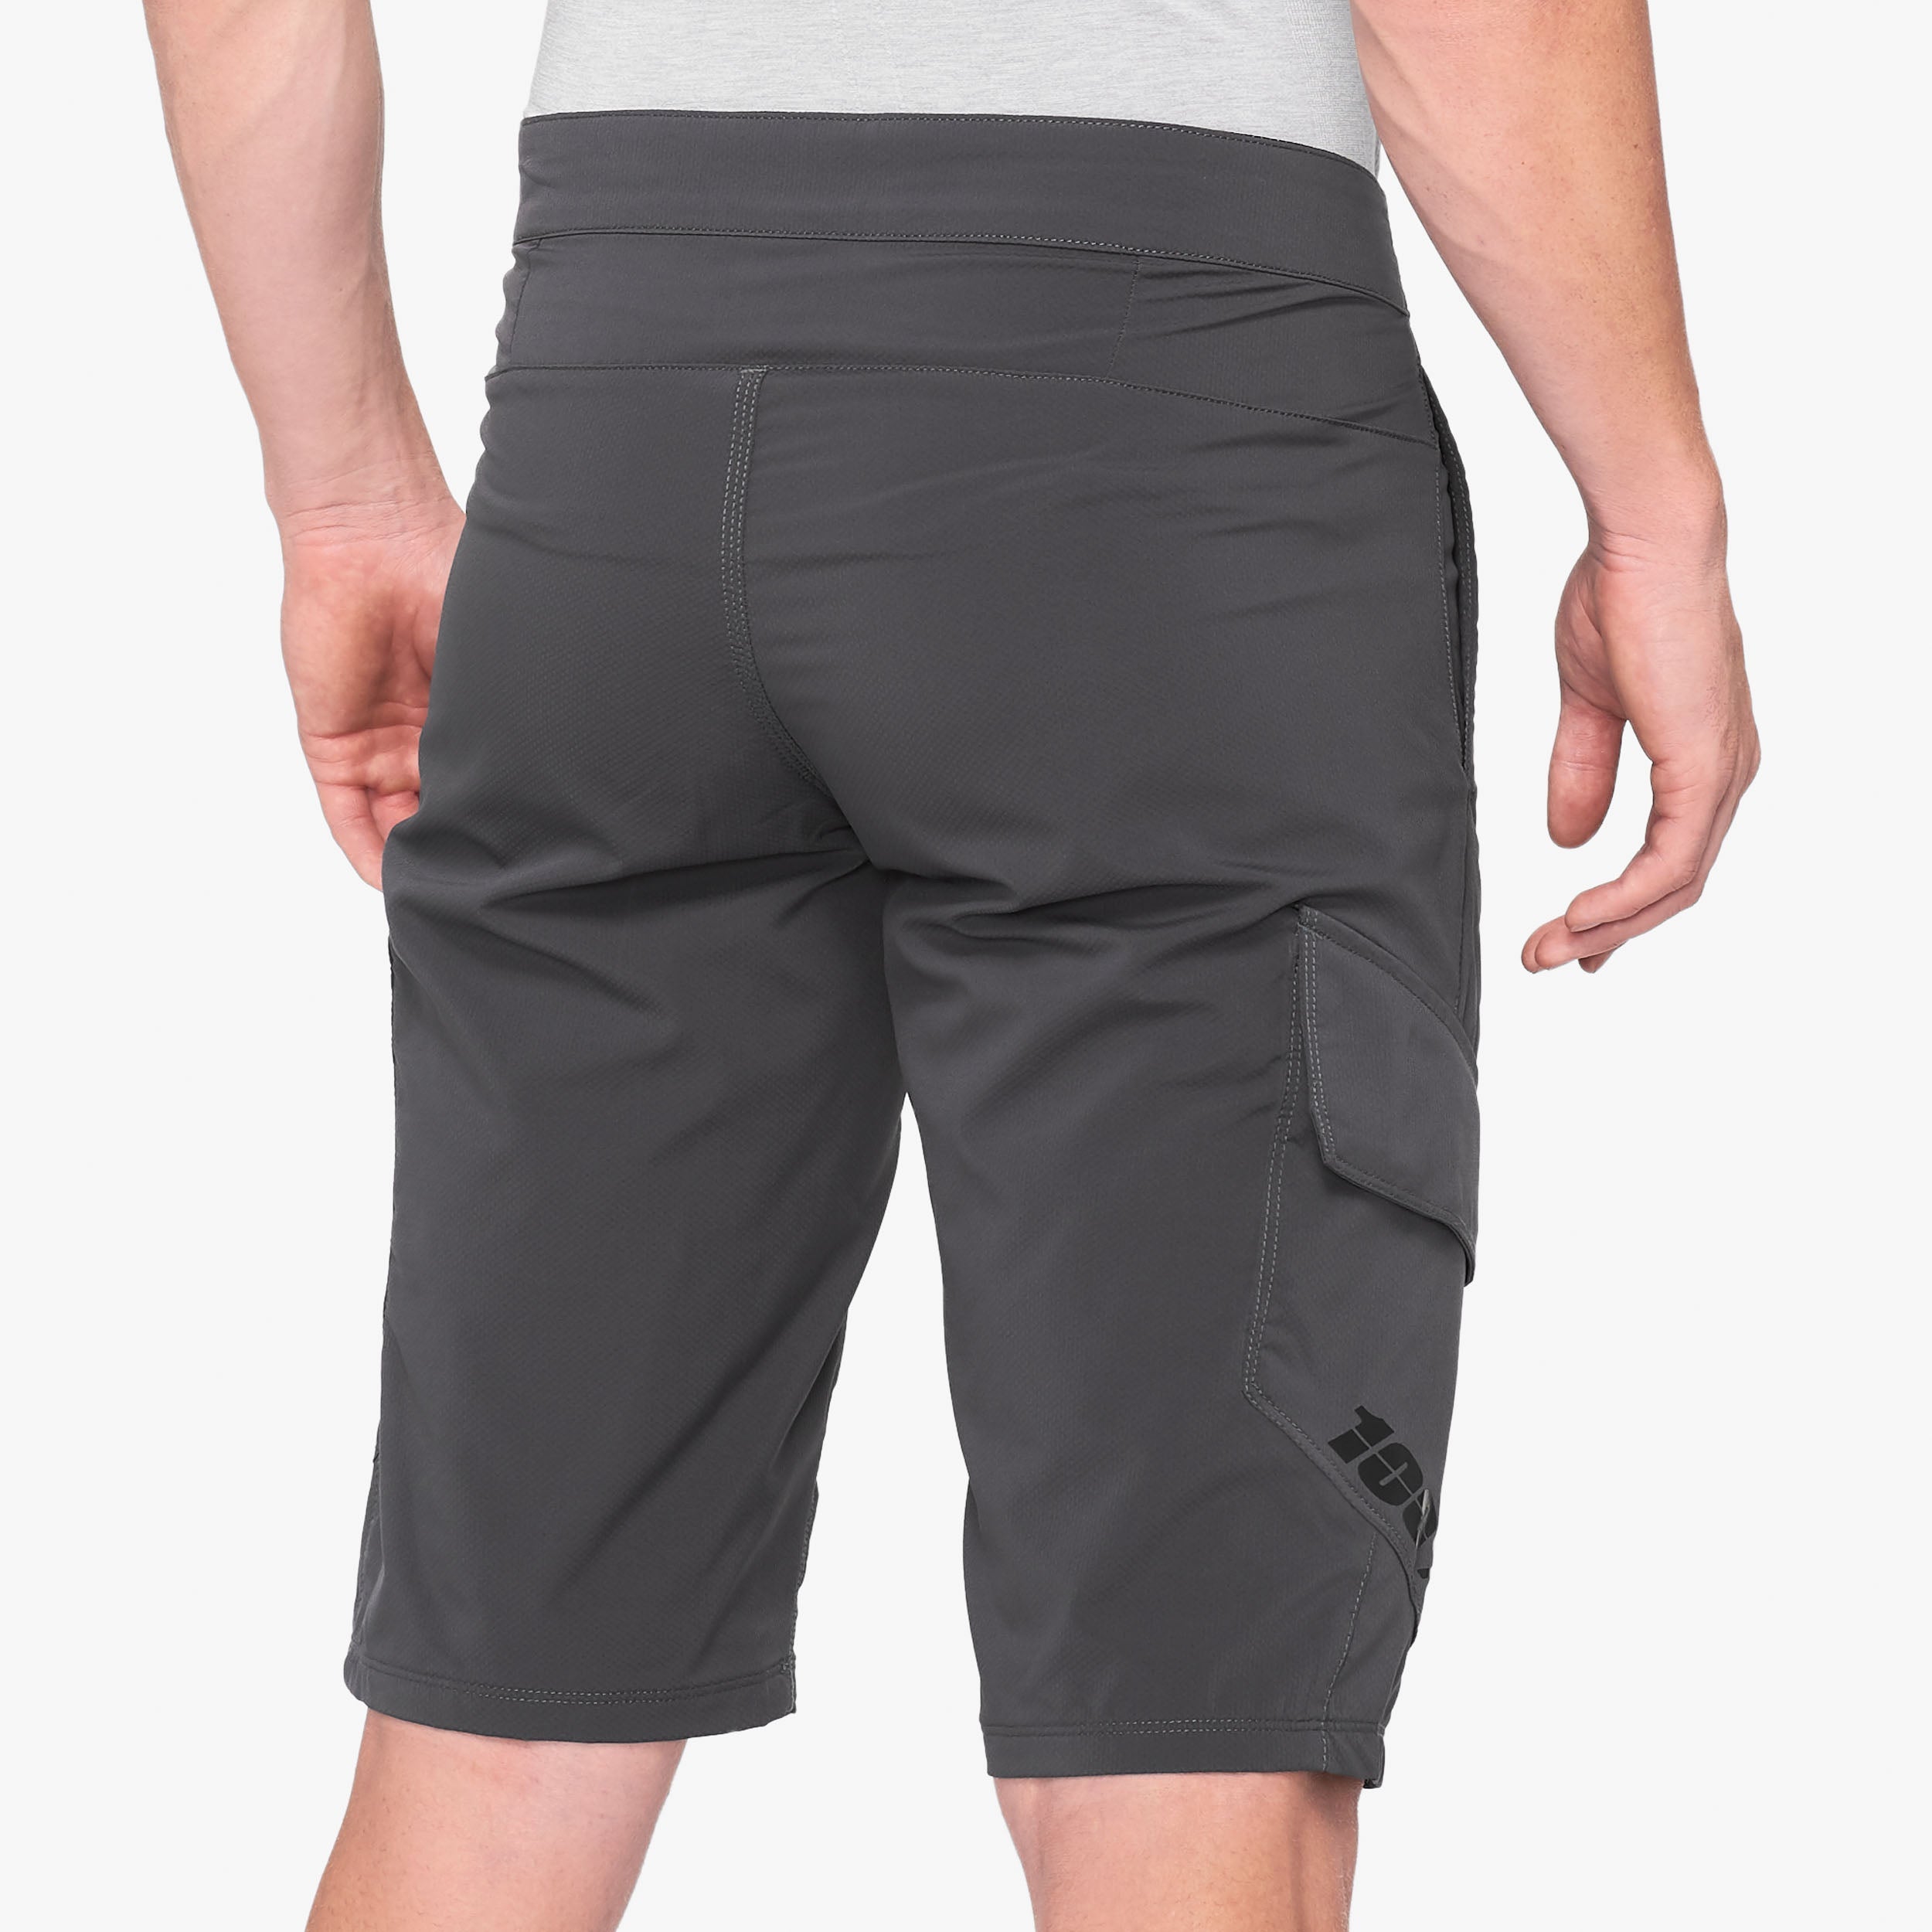 RIDECAMP Shorts Charcoal - Secondary